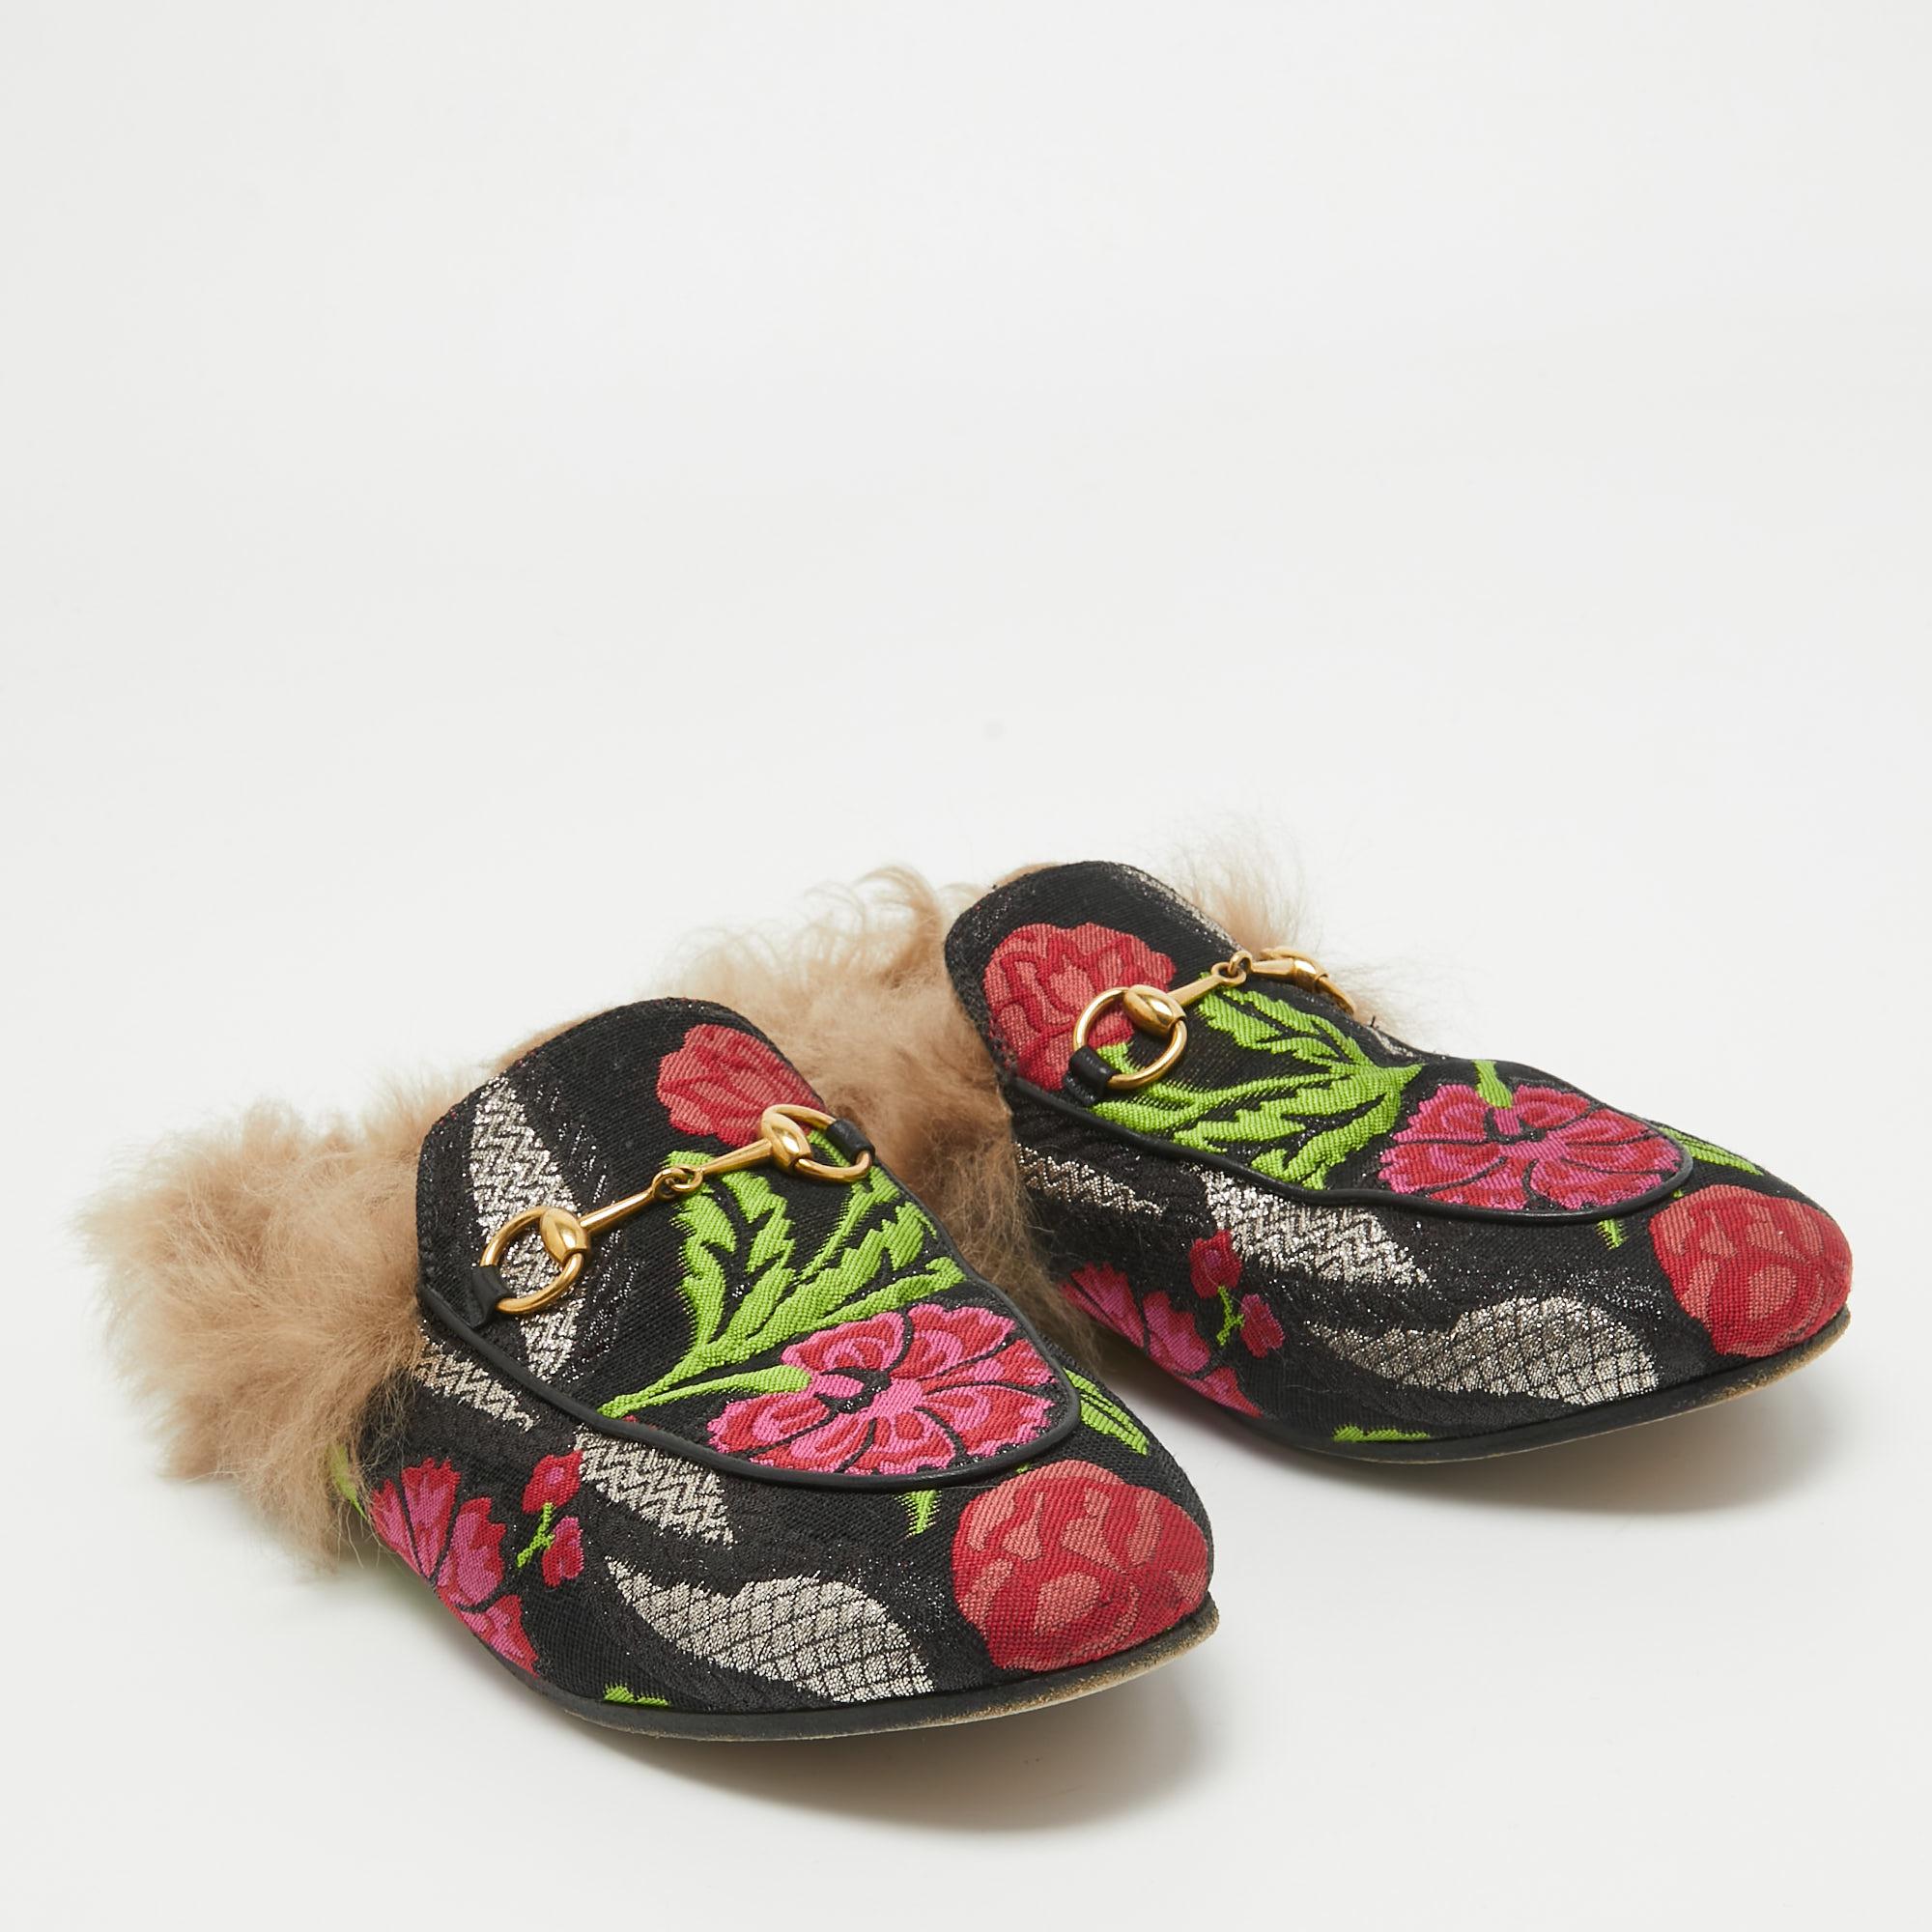 These Gucci Princetown mules signify luxury and practicality. An ultimate favorite of style enthusiasts, its silhouette is beautifully adorned with striking designs along with a Horsebit motif on the uppers. It comes made from quality fabrics and